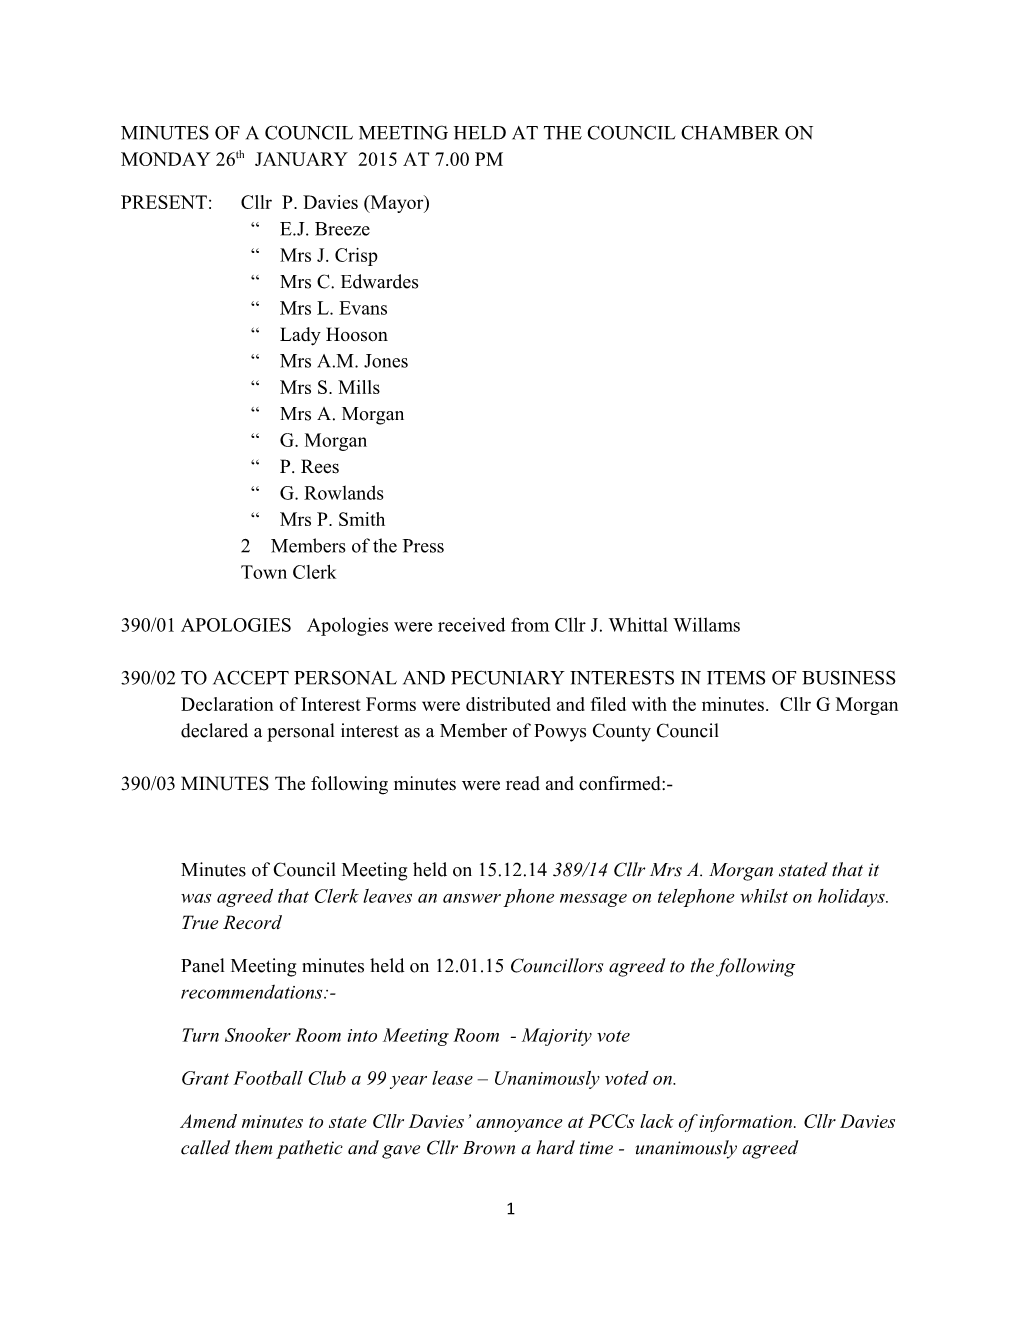 MINUTES of a COUNCIL MEETING HELD at the COUNCIL CHAMBER on MONDAY 26Th JANUARY 2015 at 7.00 PM